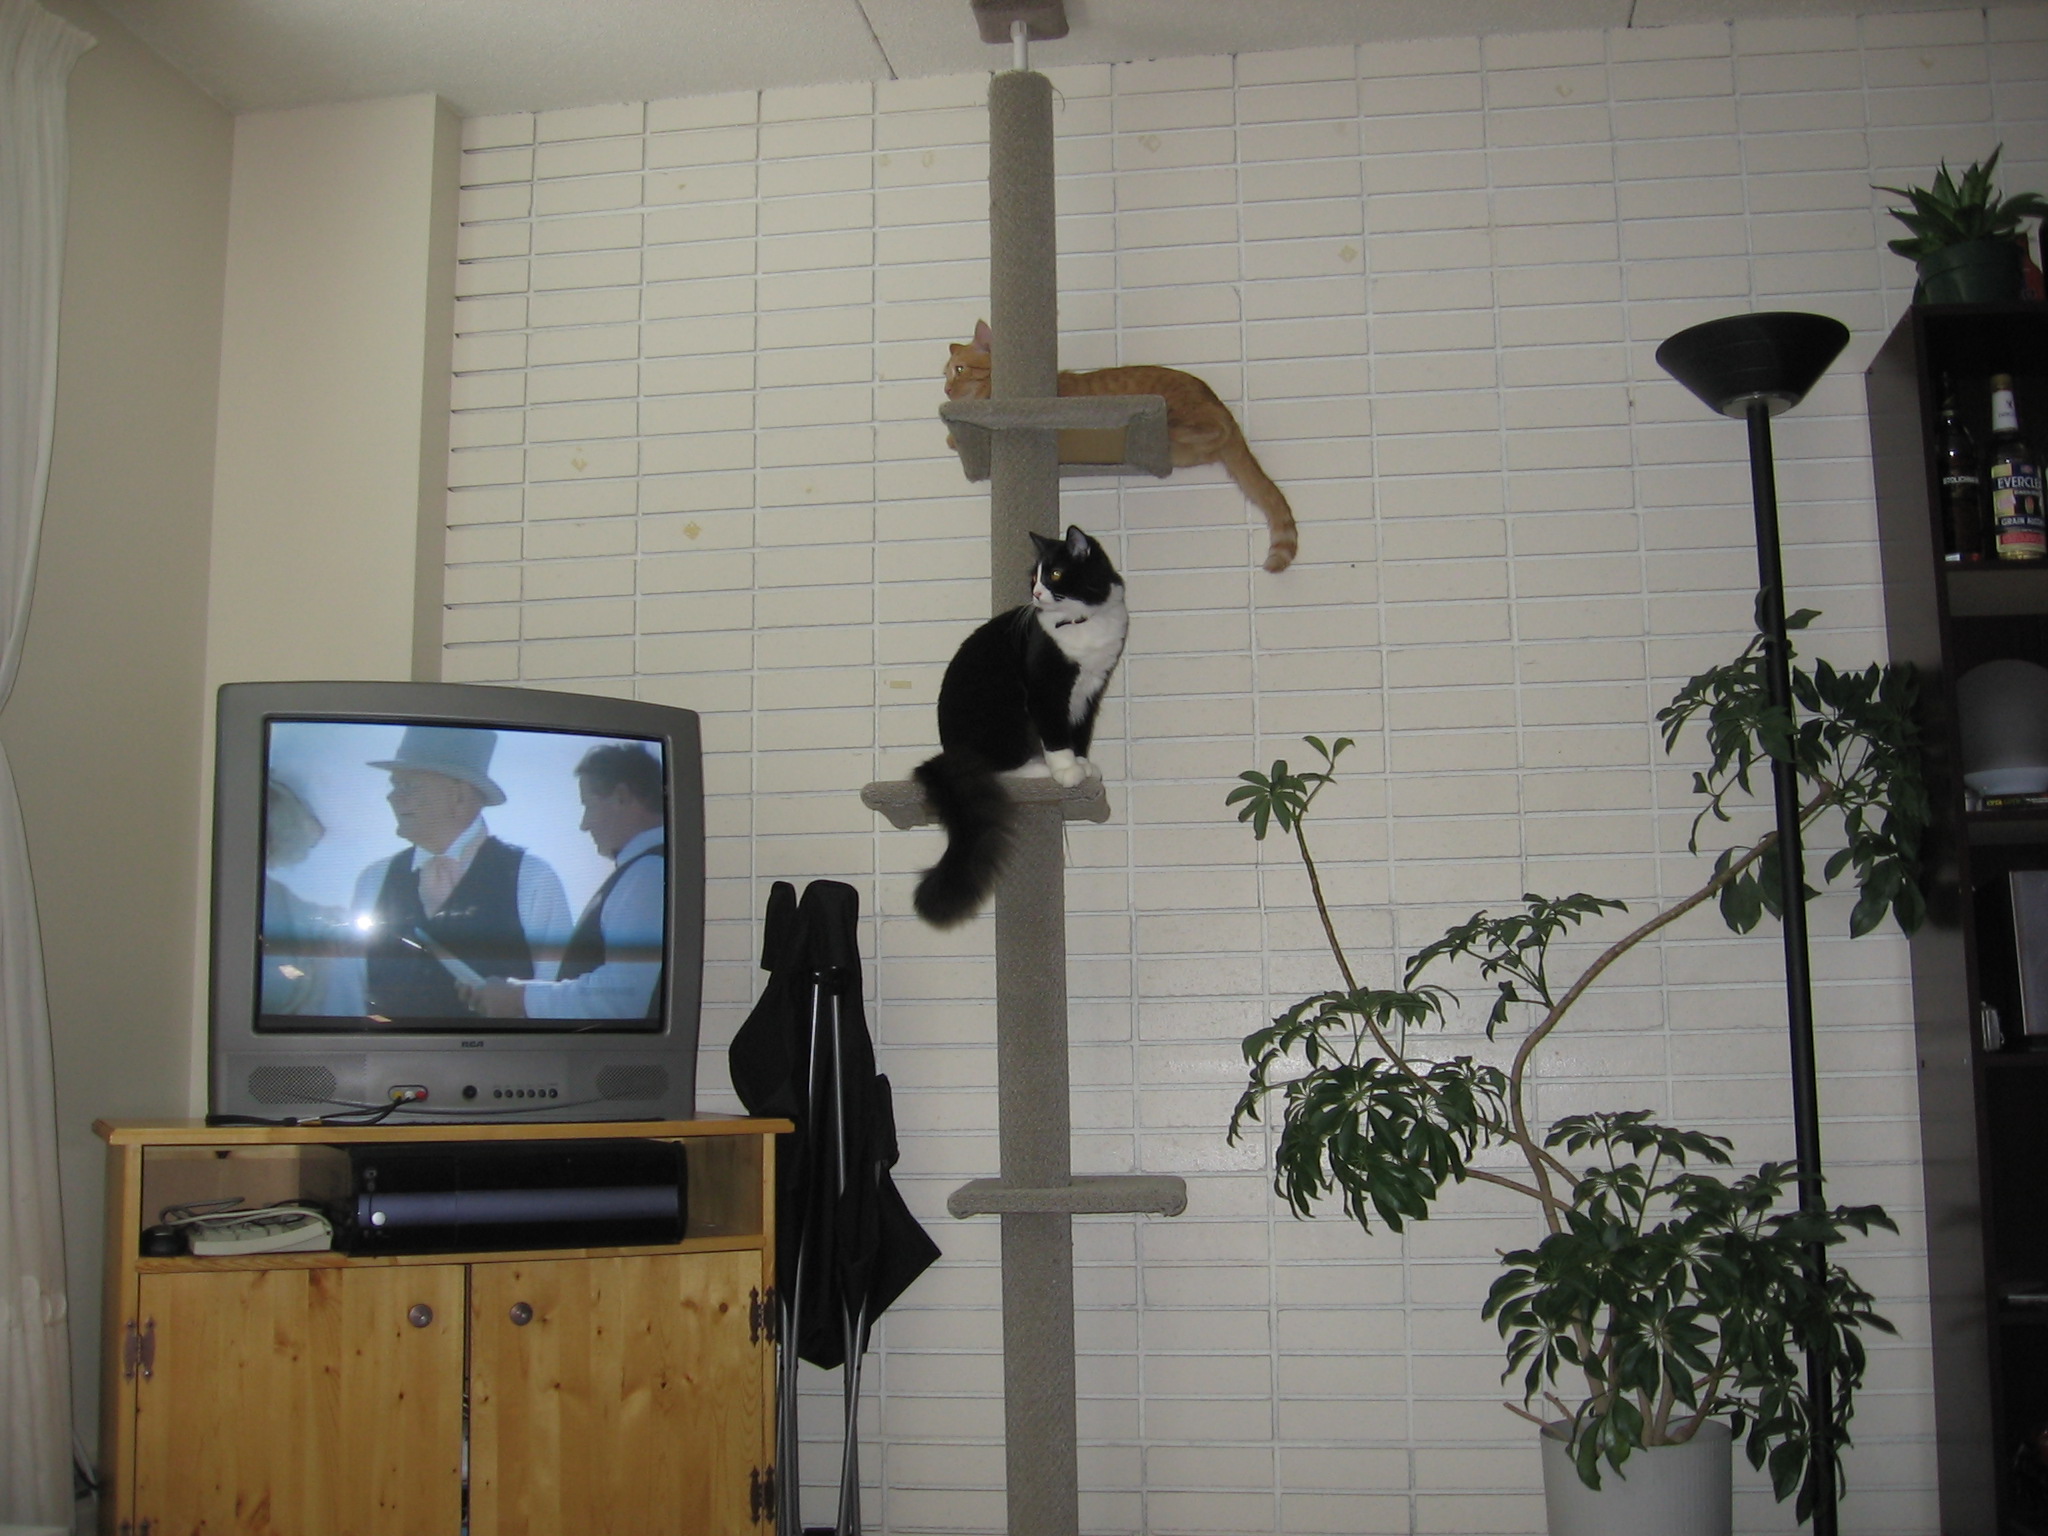 Nikita and Jack on the cat tree, between the tv and plant stand.